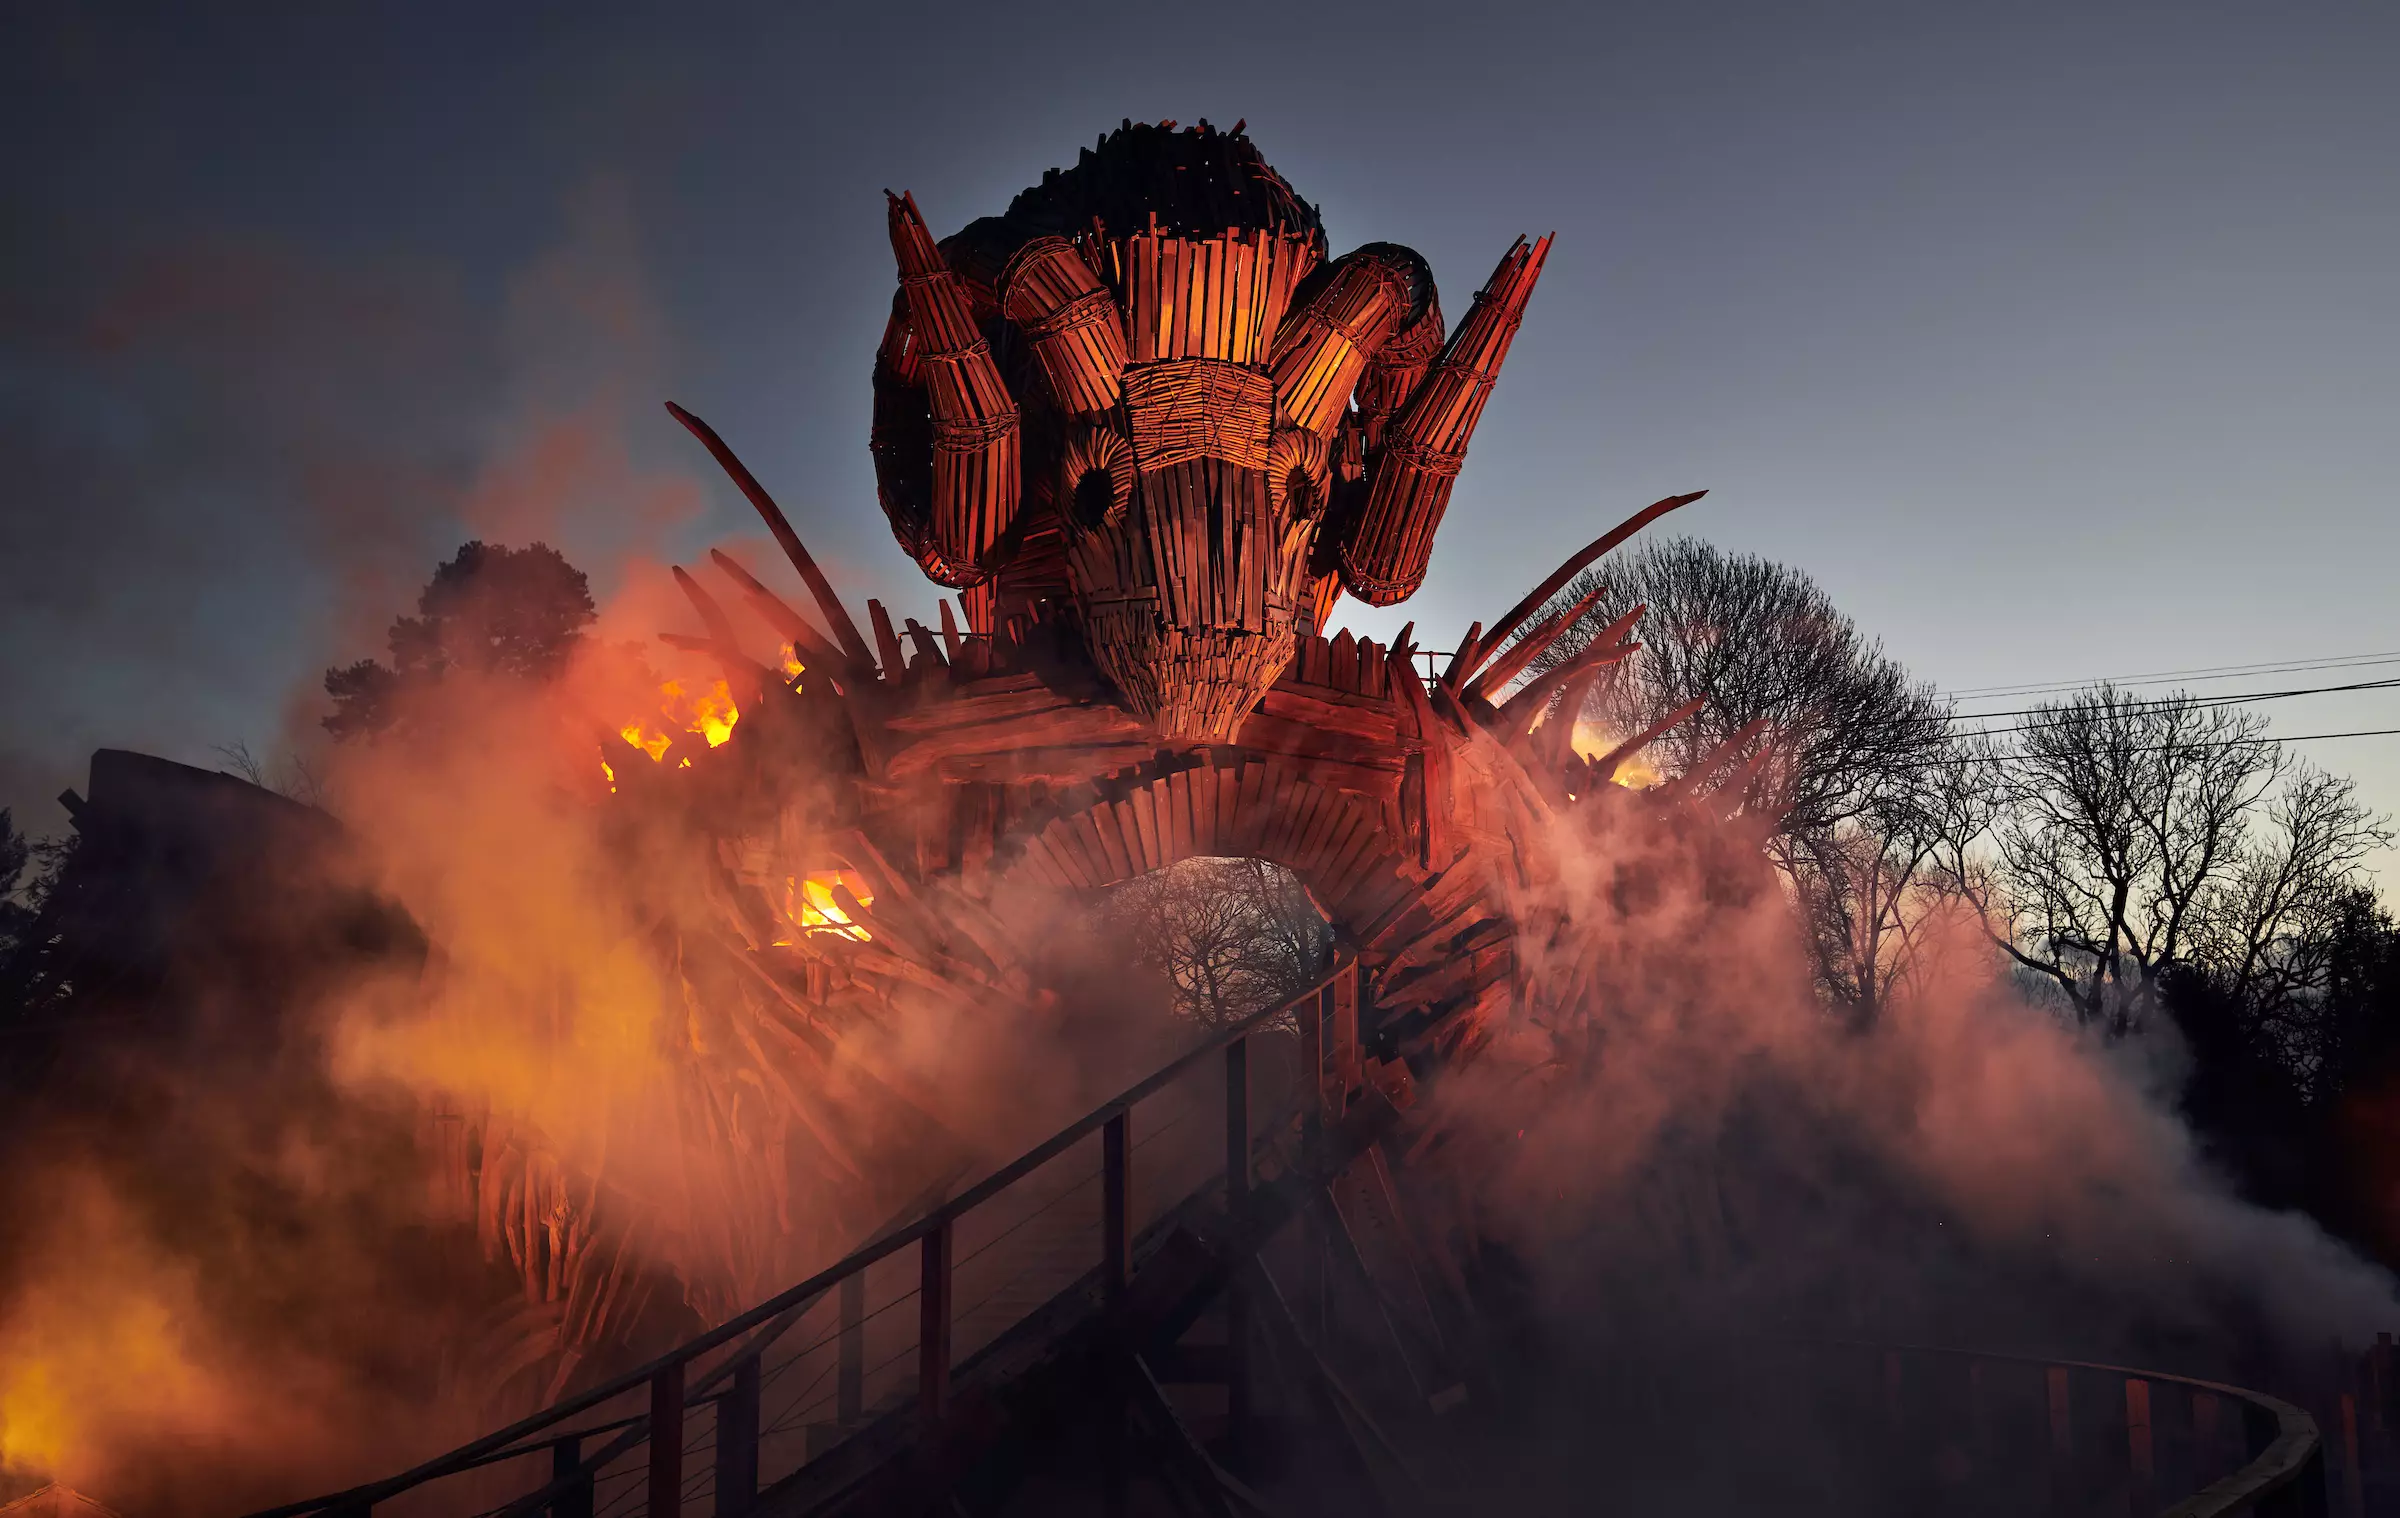 Alton Towers Wicker Man ride closed until further notice.